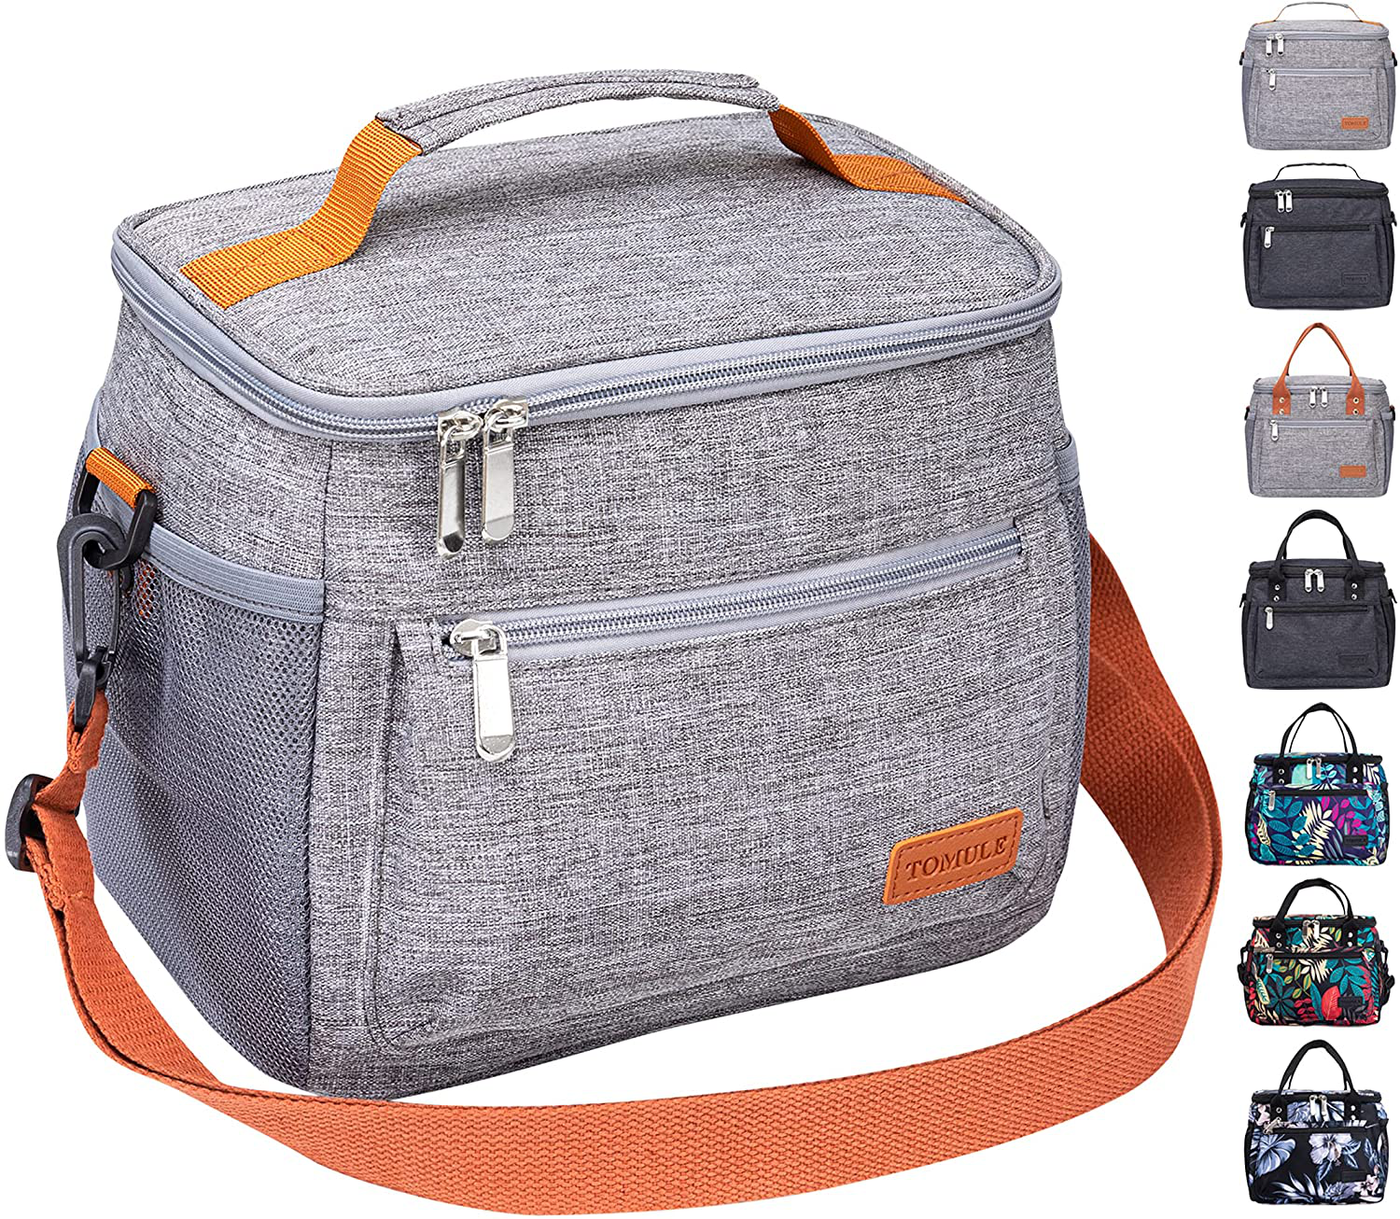 TOMULE Insulated Lunch Bag Reusable Cooler Tote Bag, Soft Freezable Lunch Box Holder, Durable Portable Leakproof Thermal Lunch Container for Women Men Kid Office Work School Picnic Travel Beach, GRAY